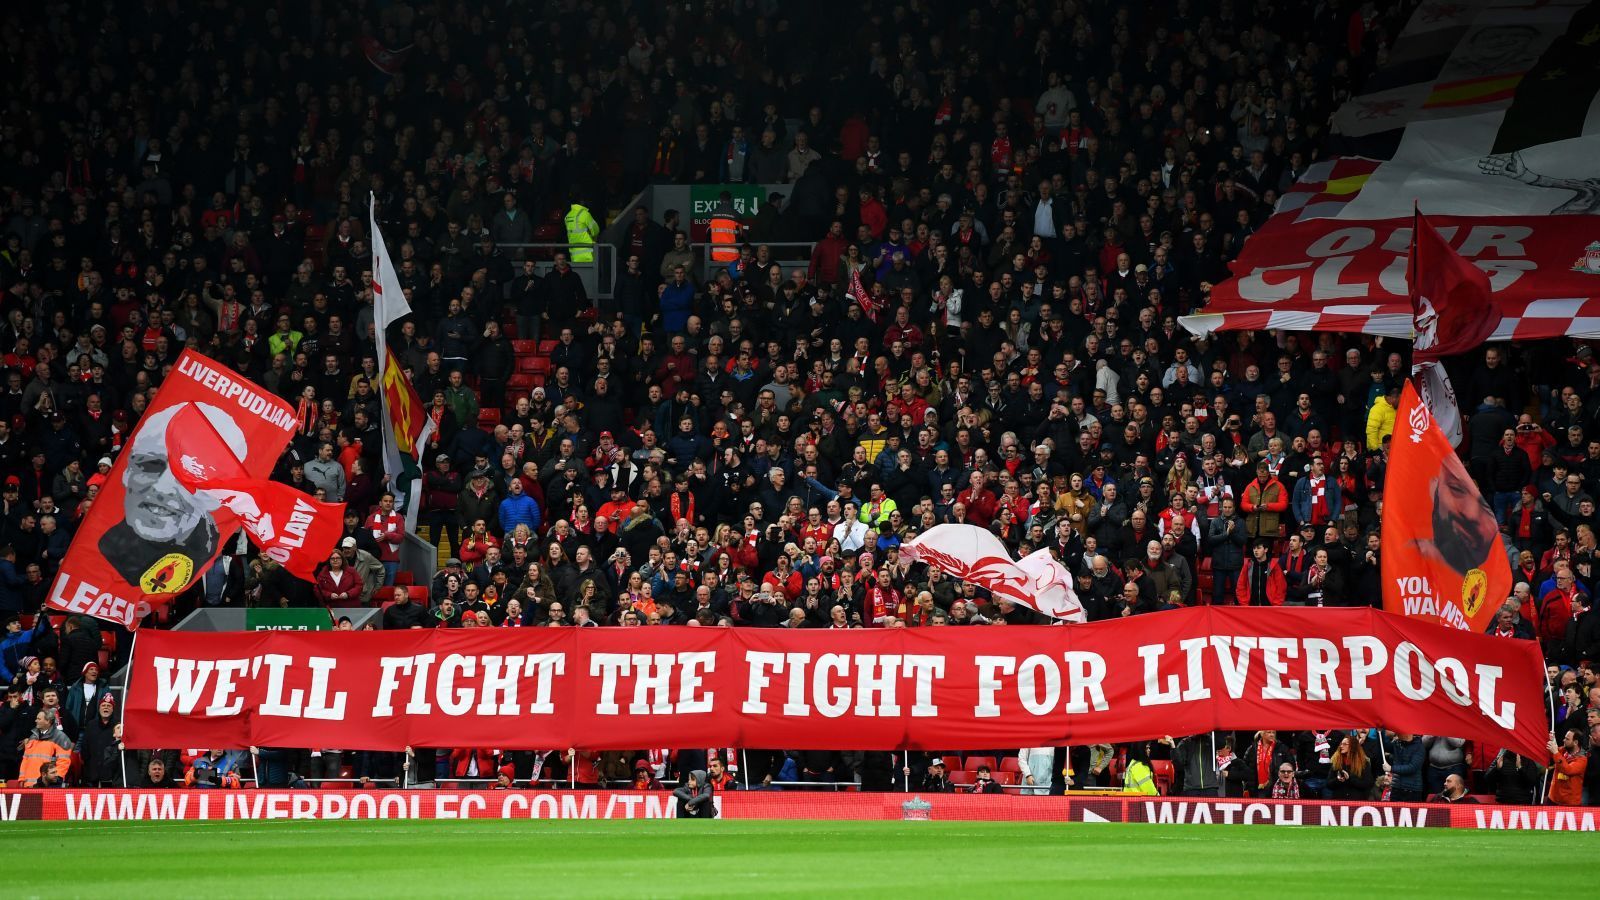 Why Liverpool fans boo the national anthem